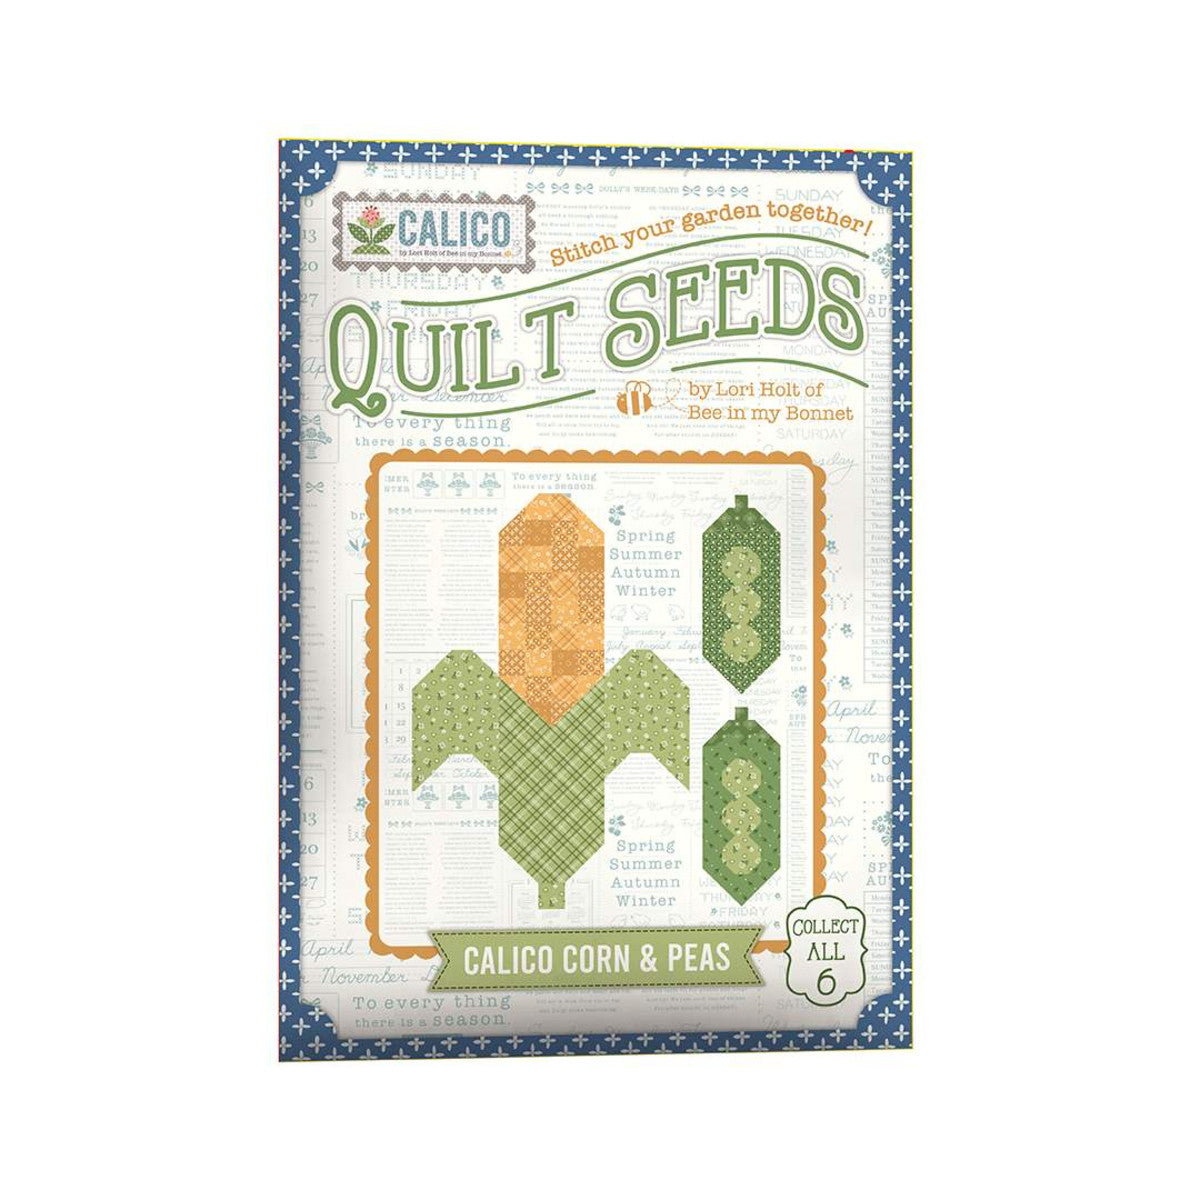 corn and peas quilt seeds pattern